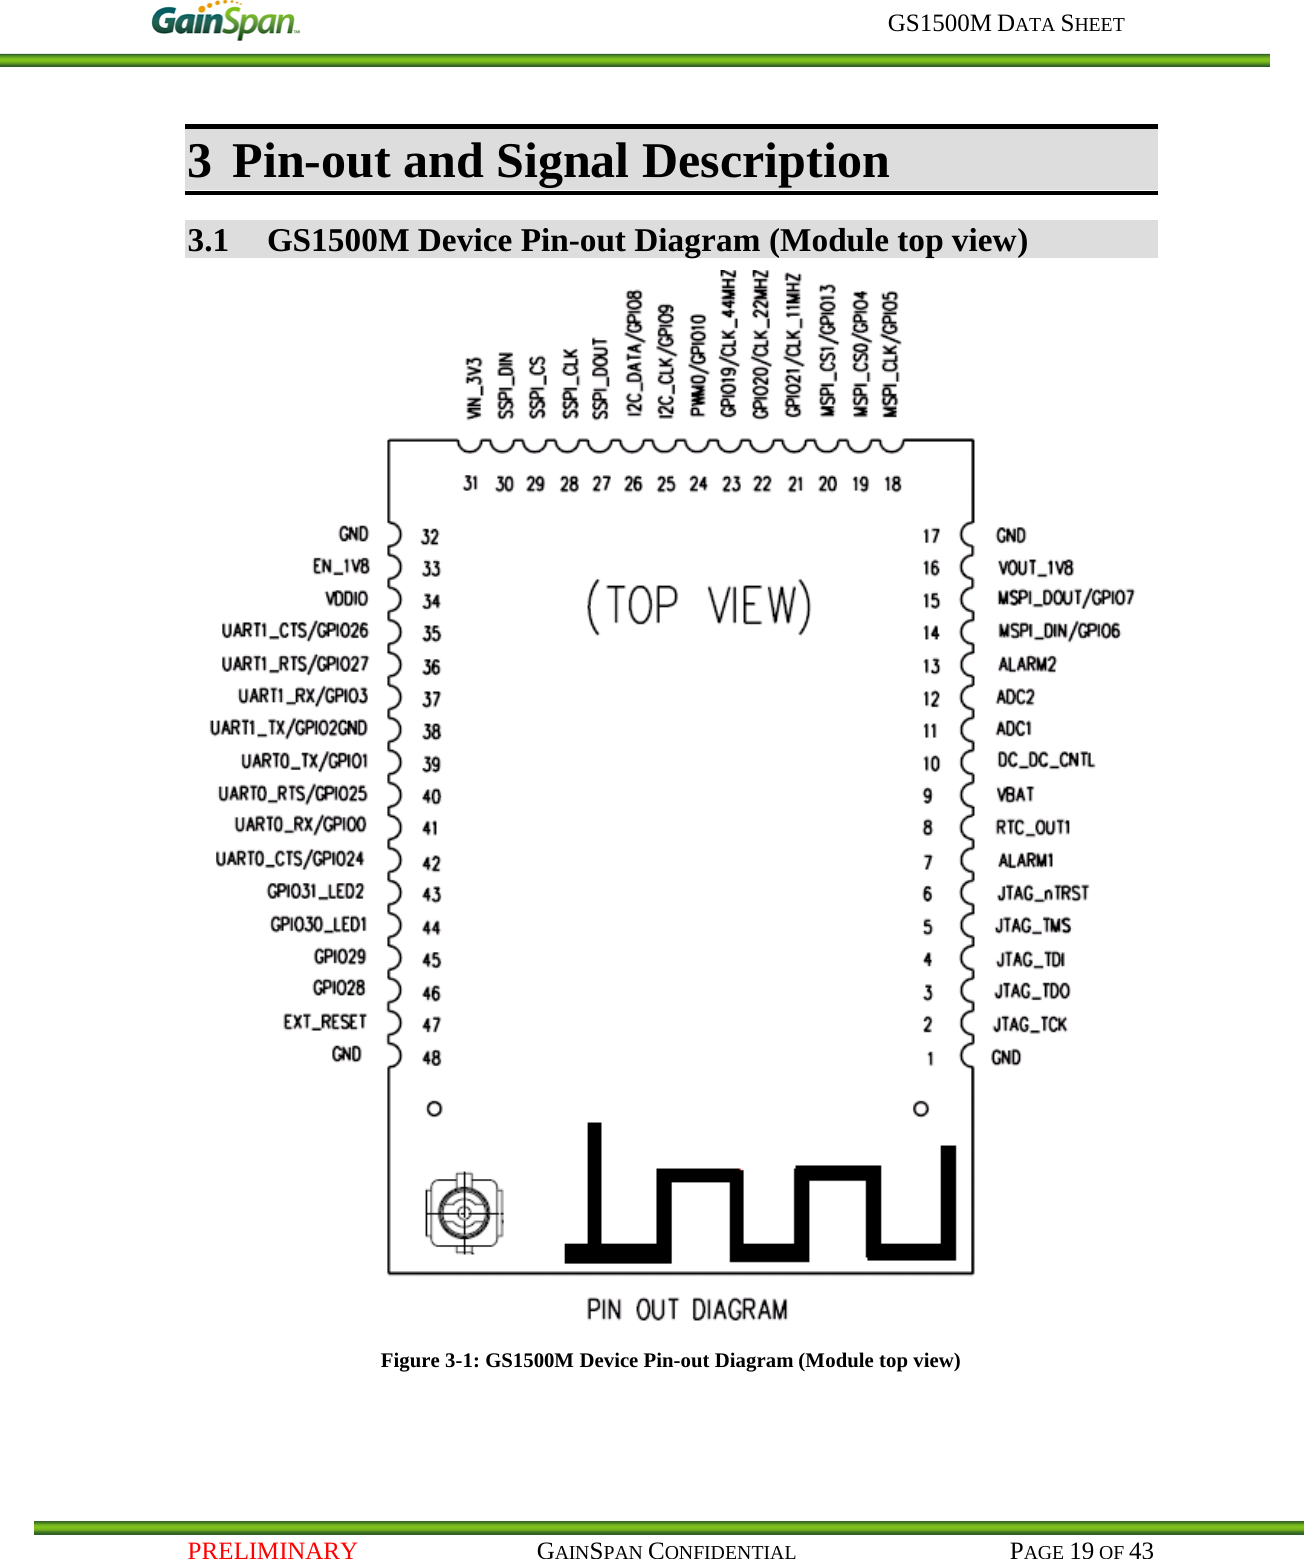     GS1500M DATA SHEET   PRELIMINARY                                    GAINSPAN CONFIDENTIAL                                           PAGE 19 OF 43 3 Pin-out and Signal Description 3.1 GS1500M Device Pin-out Diagram (Module top view)  Figure 3-1: GS1500M Device Pin-out Diagram (Module top view)    